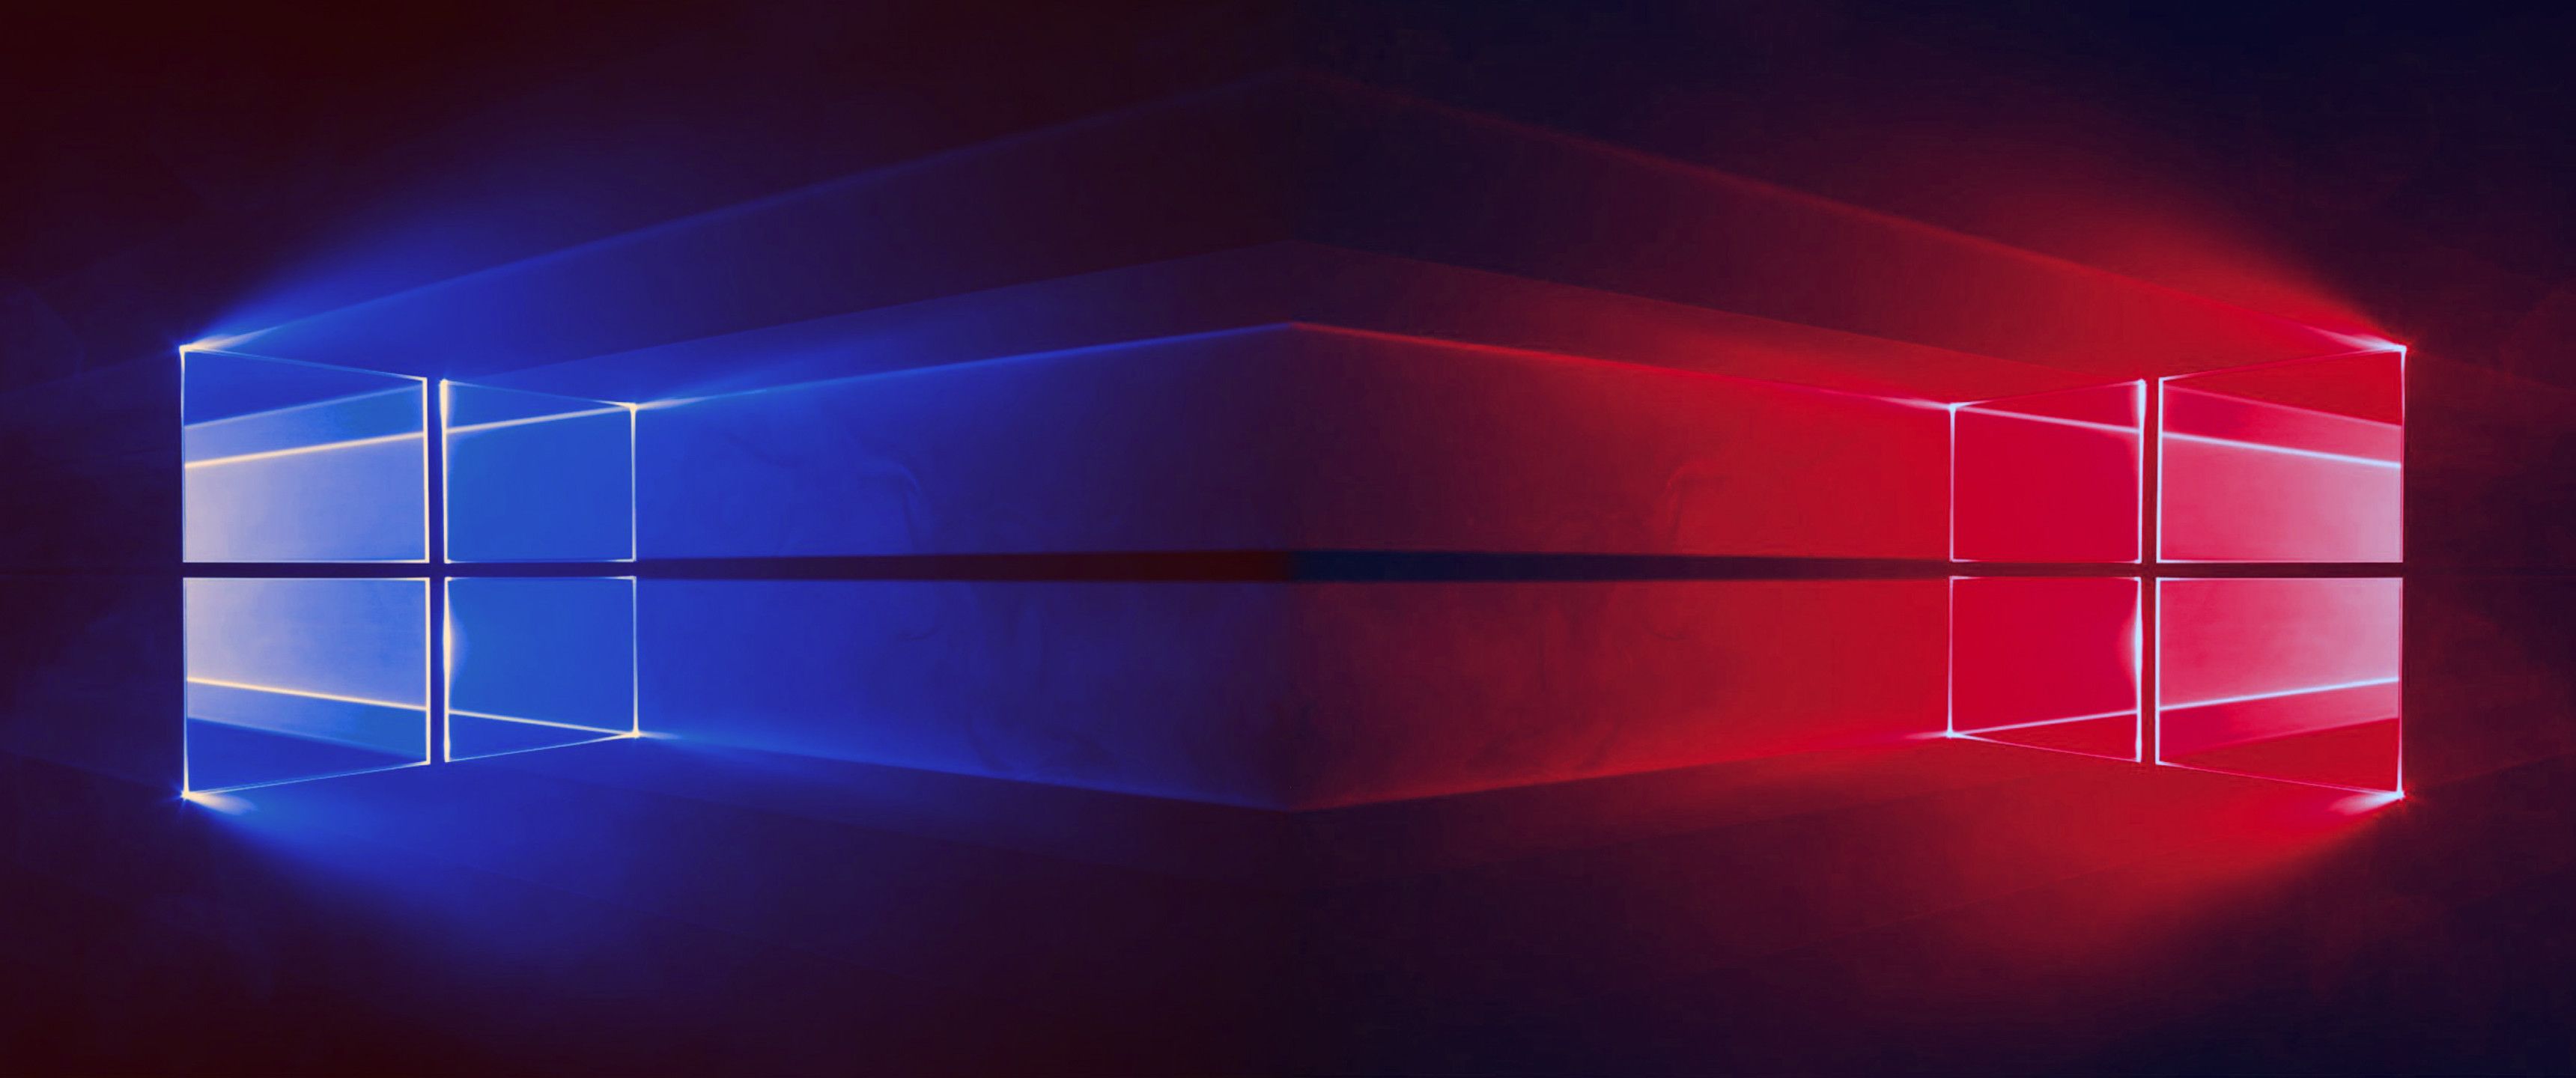 Red Windows 10 Wallpaper HD 10 Background Blue And Red